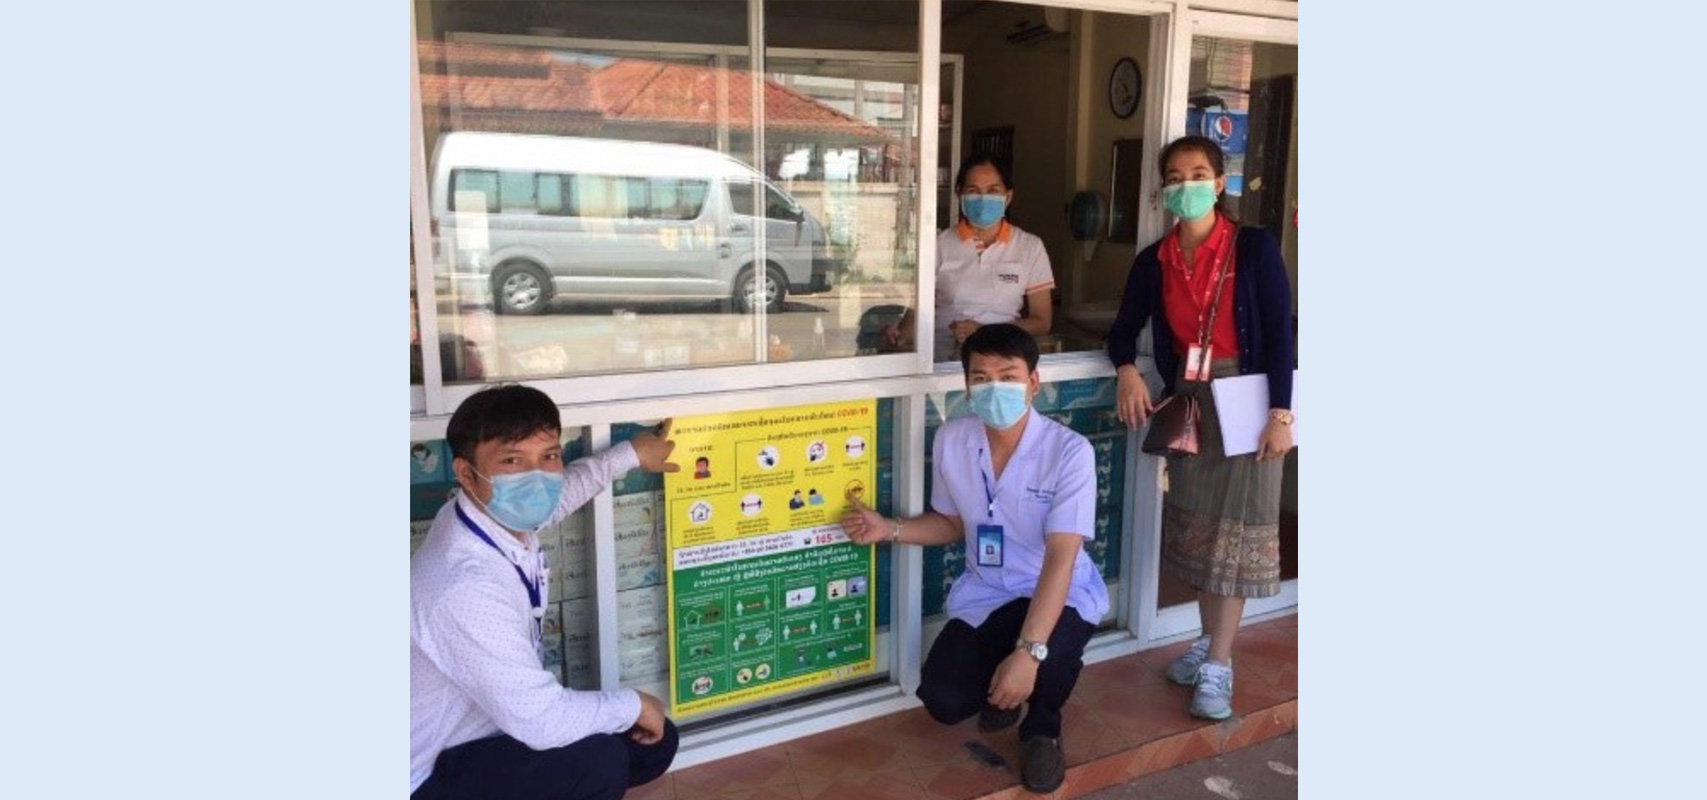 Samkham Meunsy, far right, and MOH workers deliver COVID-19 information to a pharmacy in Vientiane. (Photo: Sisavath Soukkhasing/Save the Children)